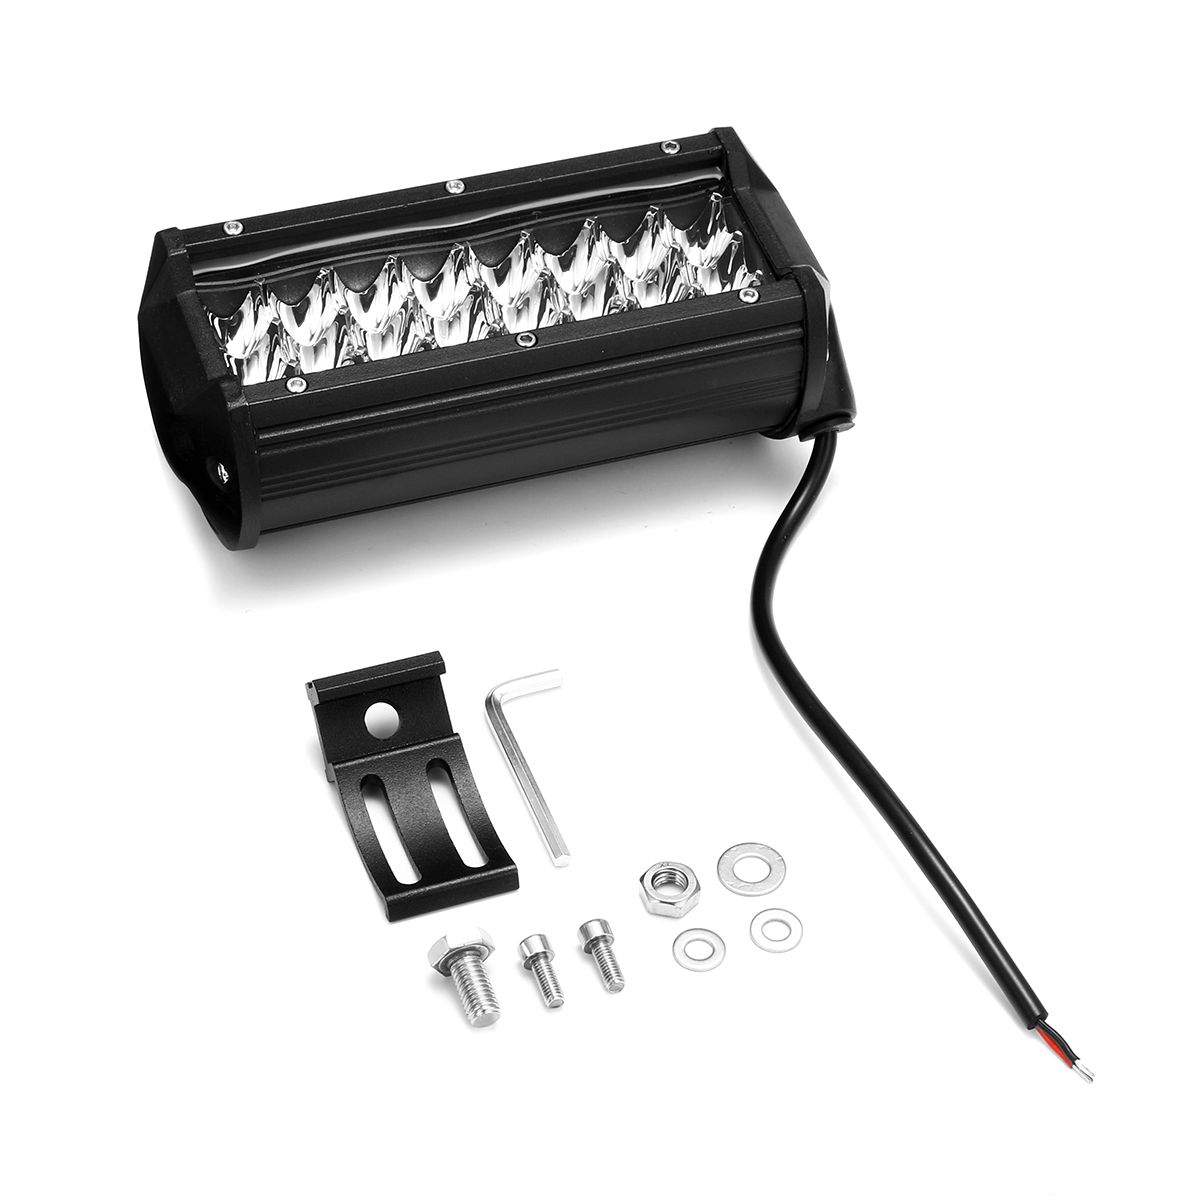 7-Inch-Spot-LED-Work-Light-Bar-Tri-Row-3030-72W-6000K-for-Offroad-4WD-SUV-1326849